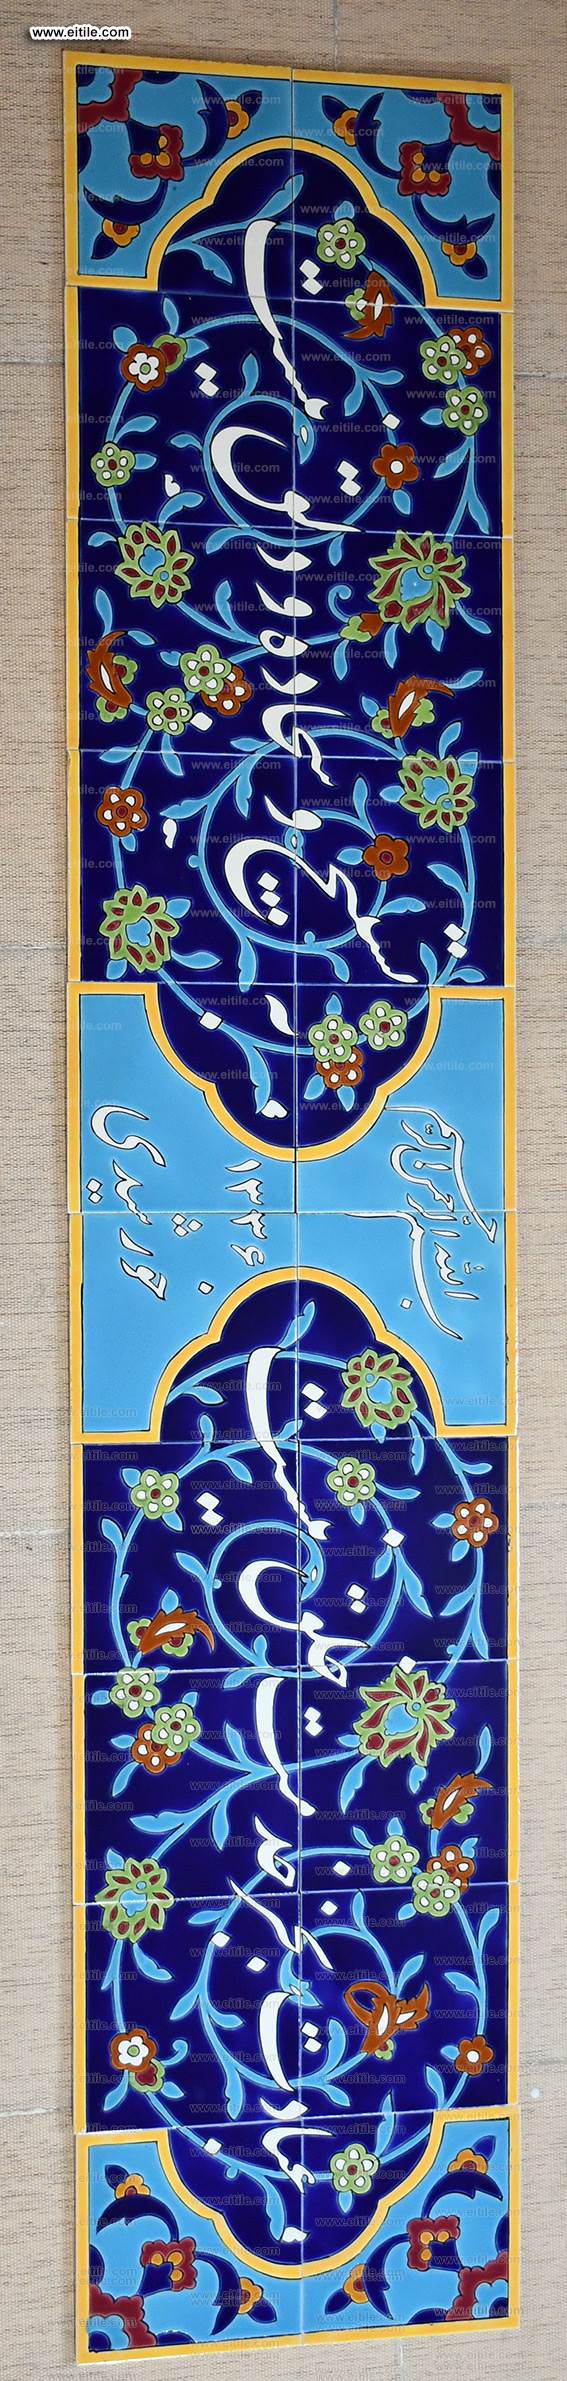 Supplier of tiles with calligraphy, www.eitile.com